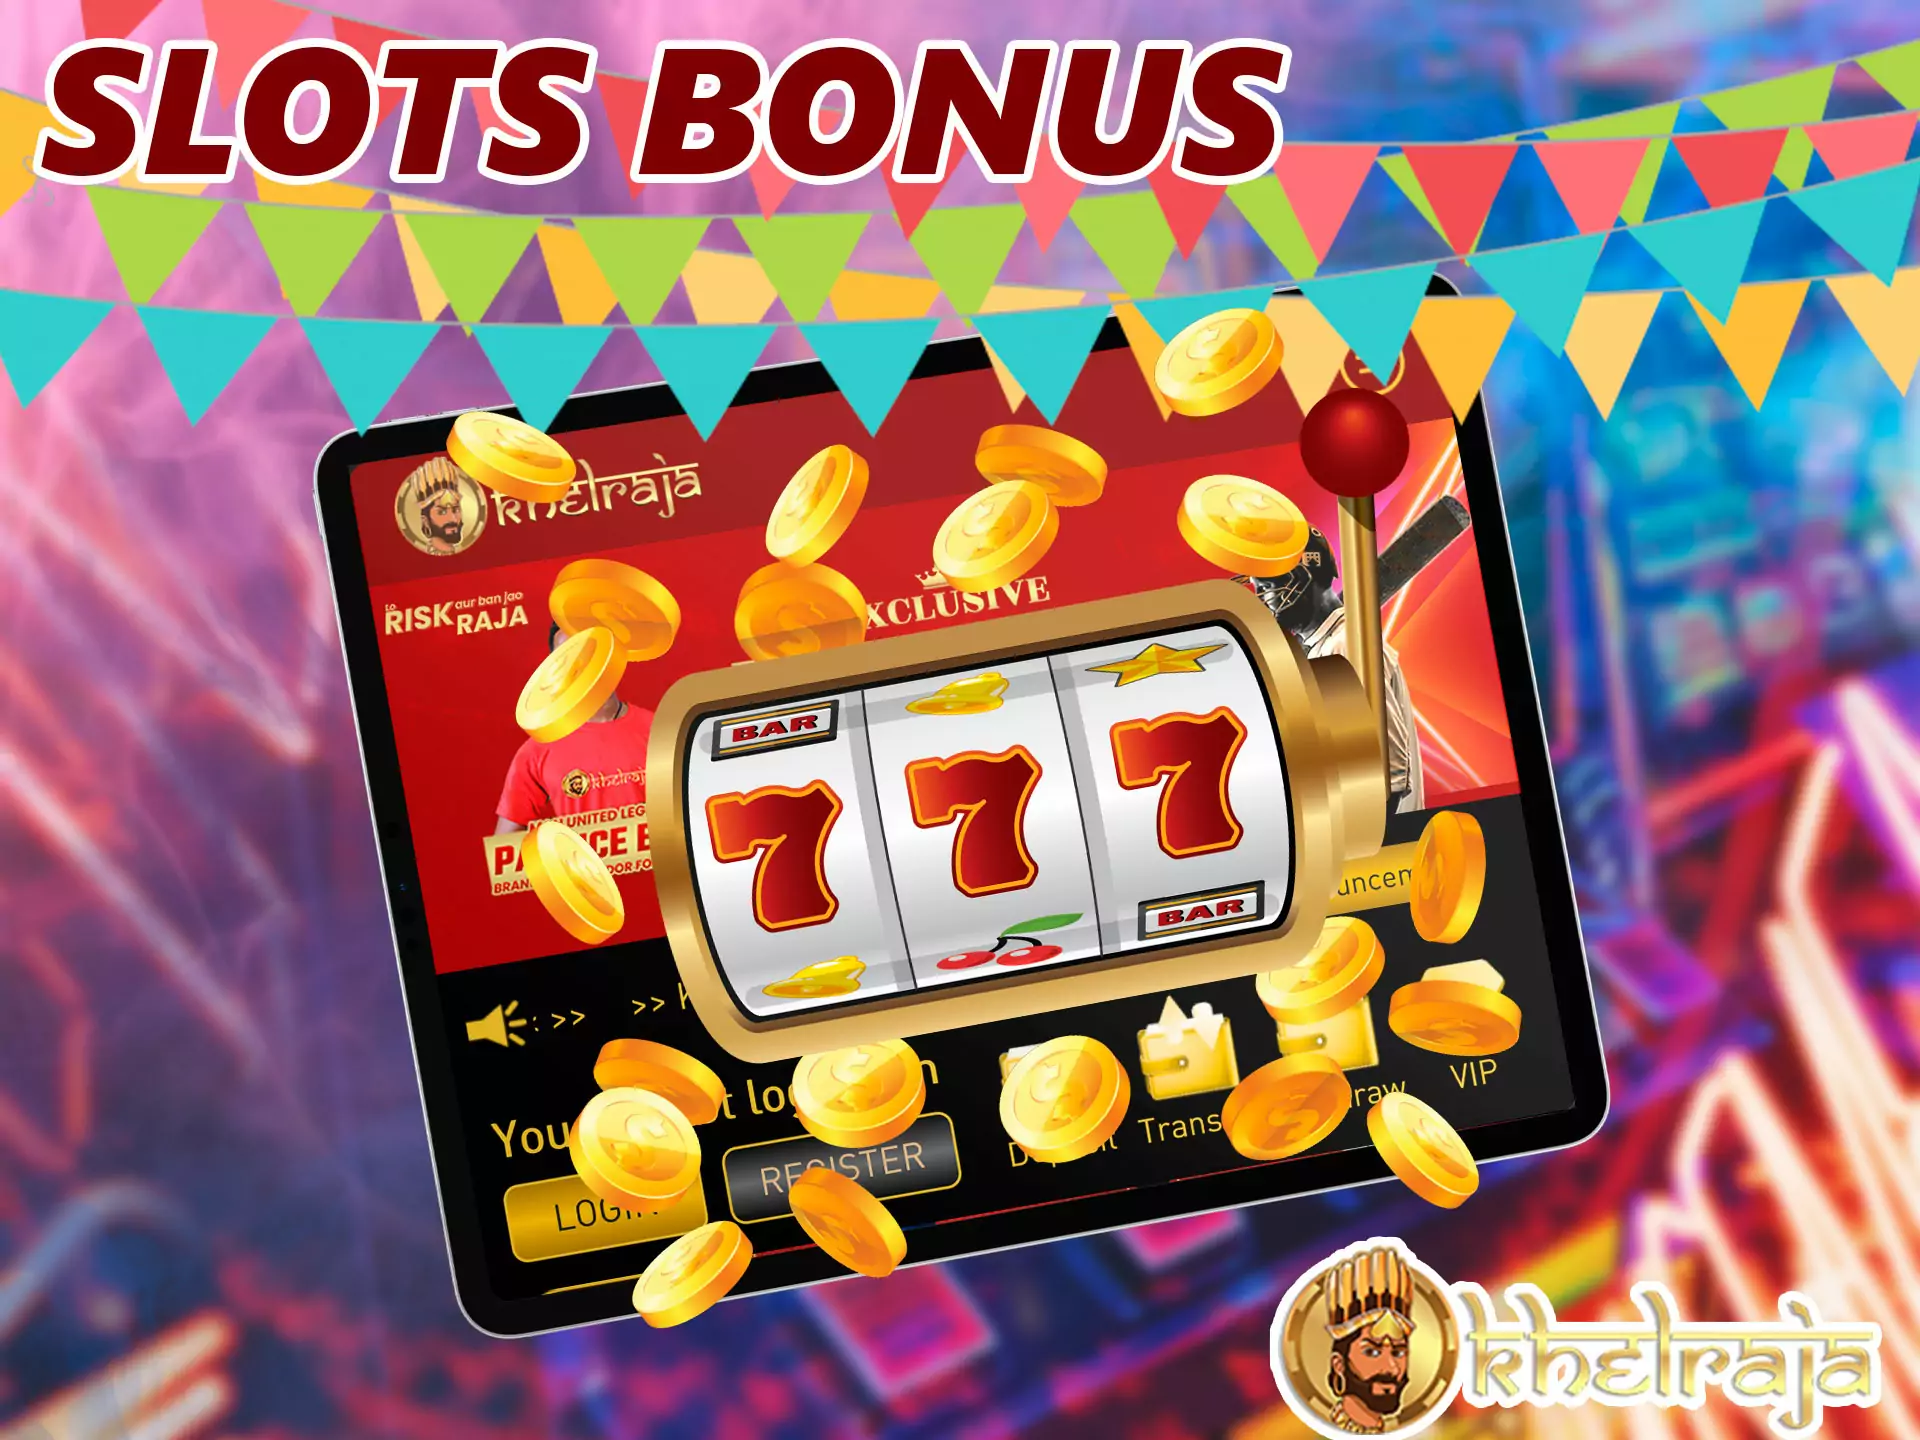 The coolest bonus that will delight fans of this type of game, 400% up to 25,000 Indian rupees, you must make your deposit on the same day you join.